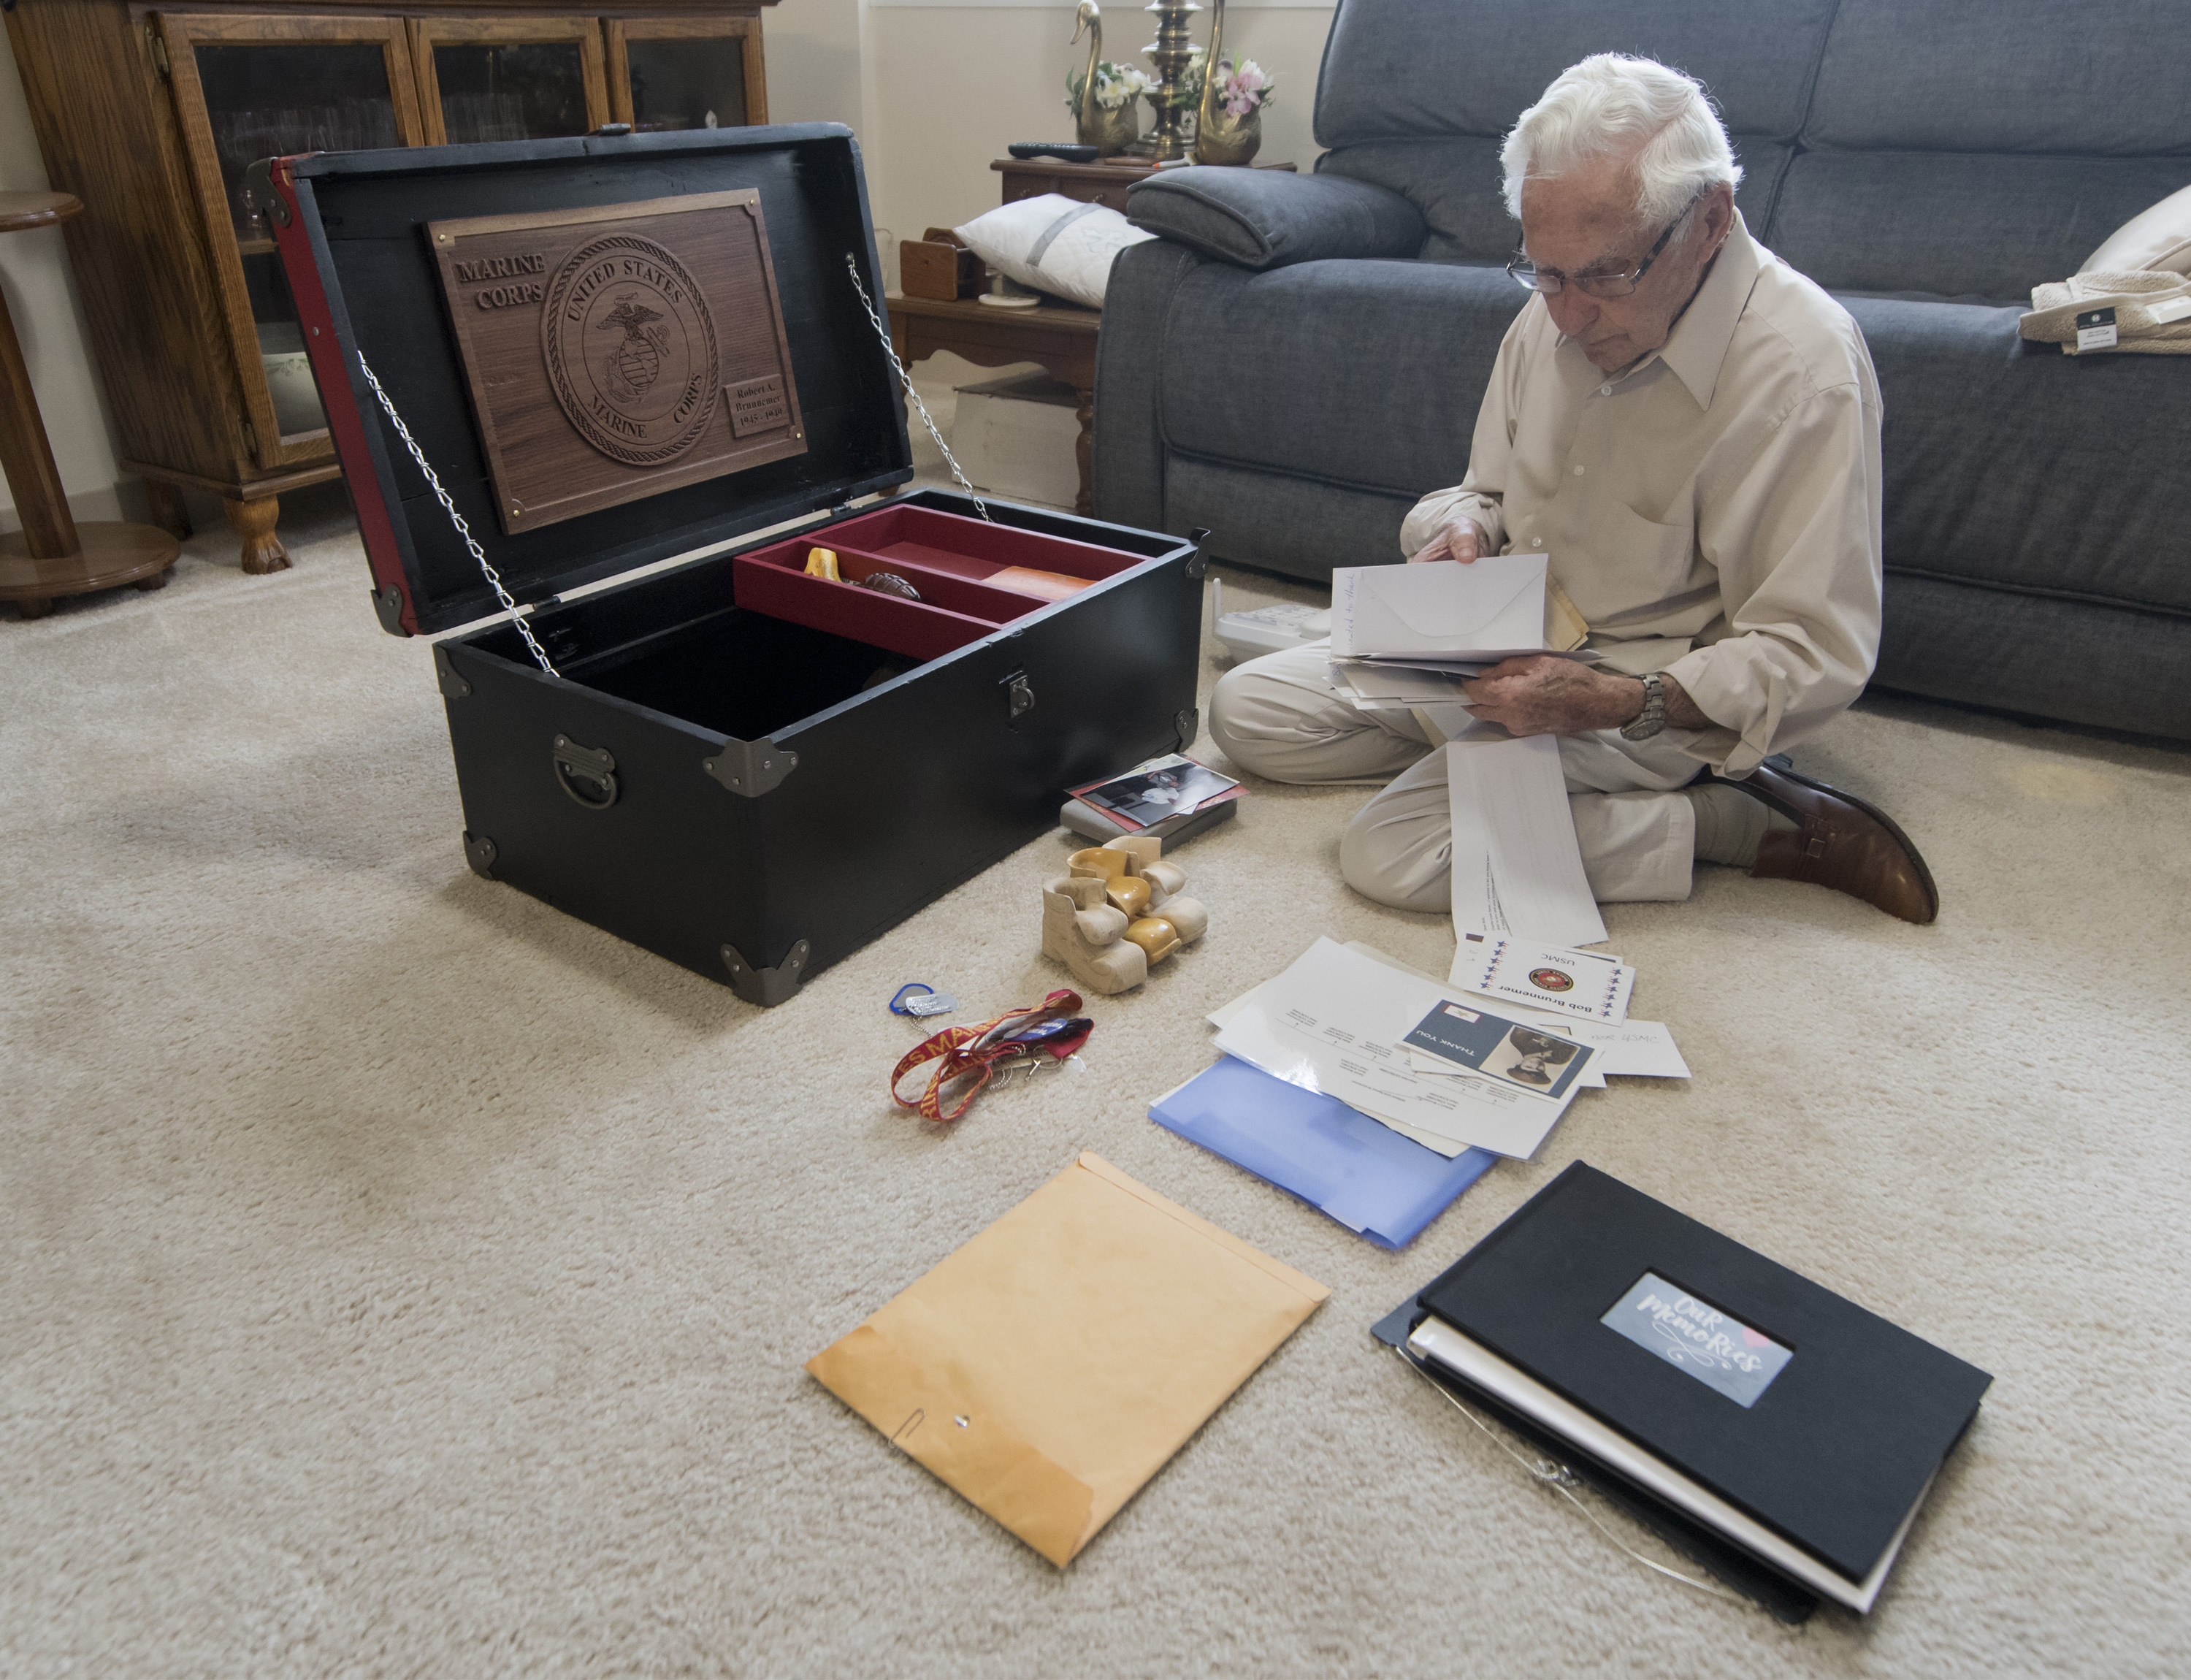 WWII vet's missing Marine Corps jacket will return to him